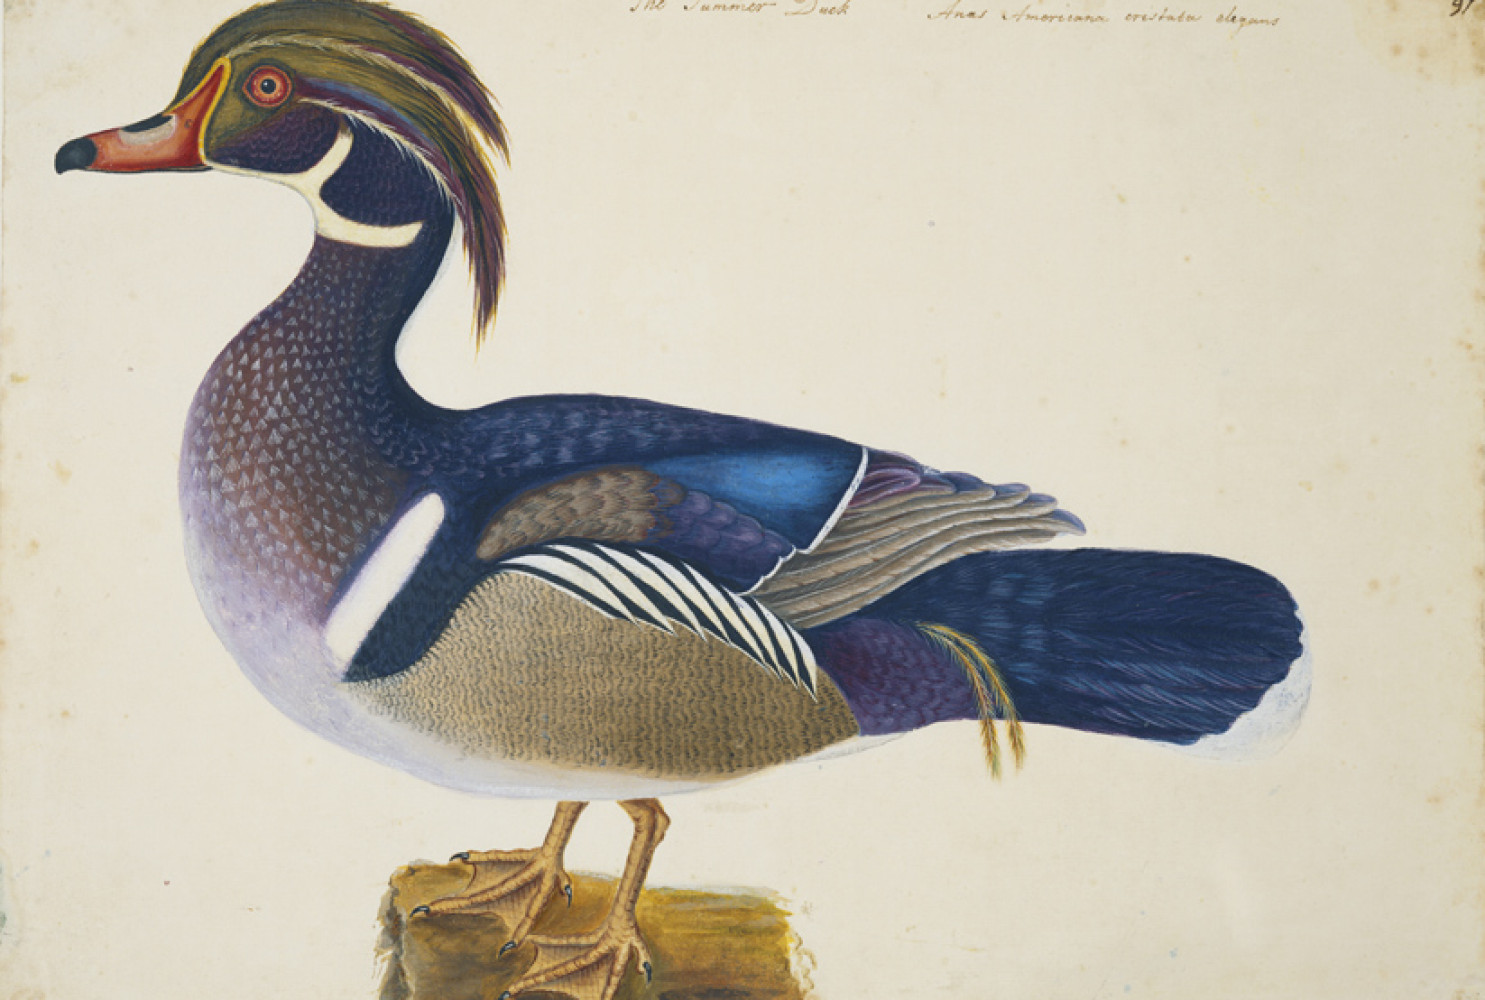 The Summer Duck, ca. 1722—1726, by Mark Catesby (British, 1682—1749); watercolor and bodycolor heightened with gum arabic, over traces of pencil; Royal Collection Trust/© Her Majesty Queen Elizabeth II 2017